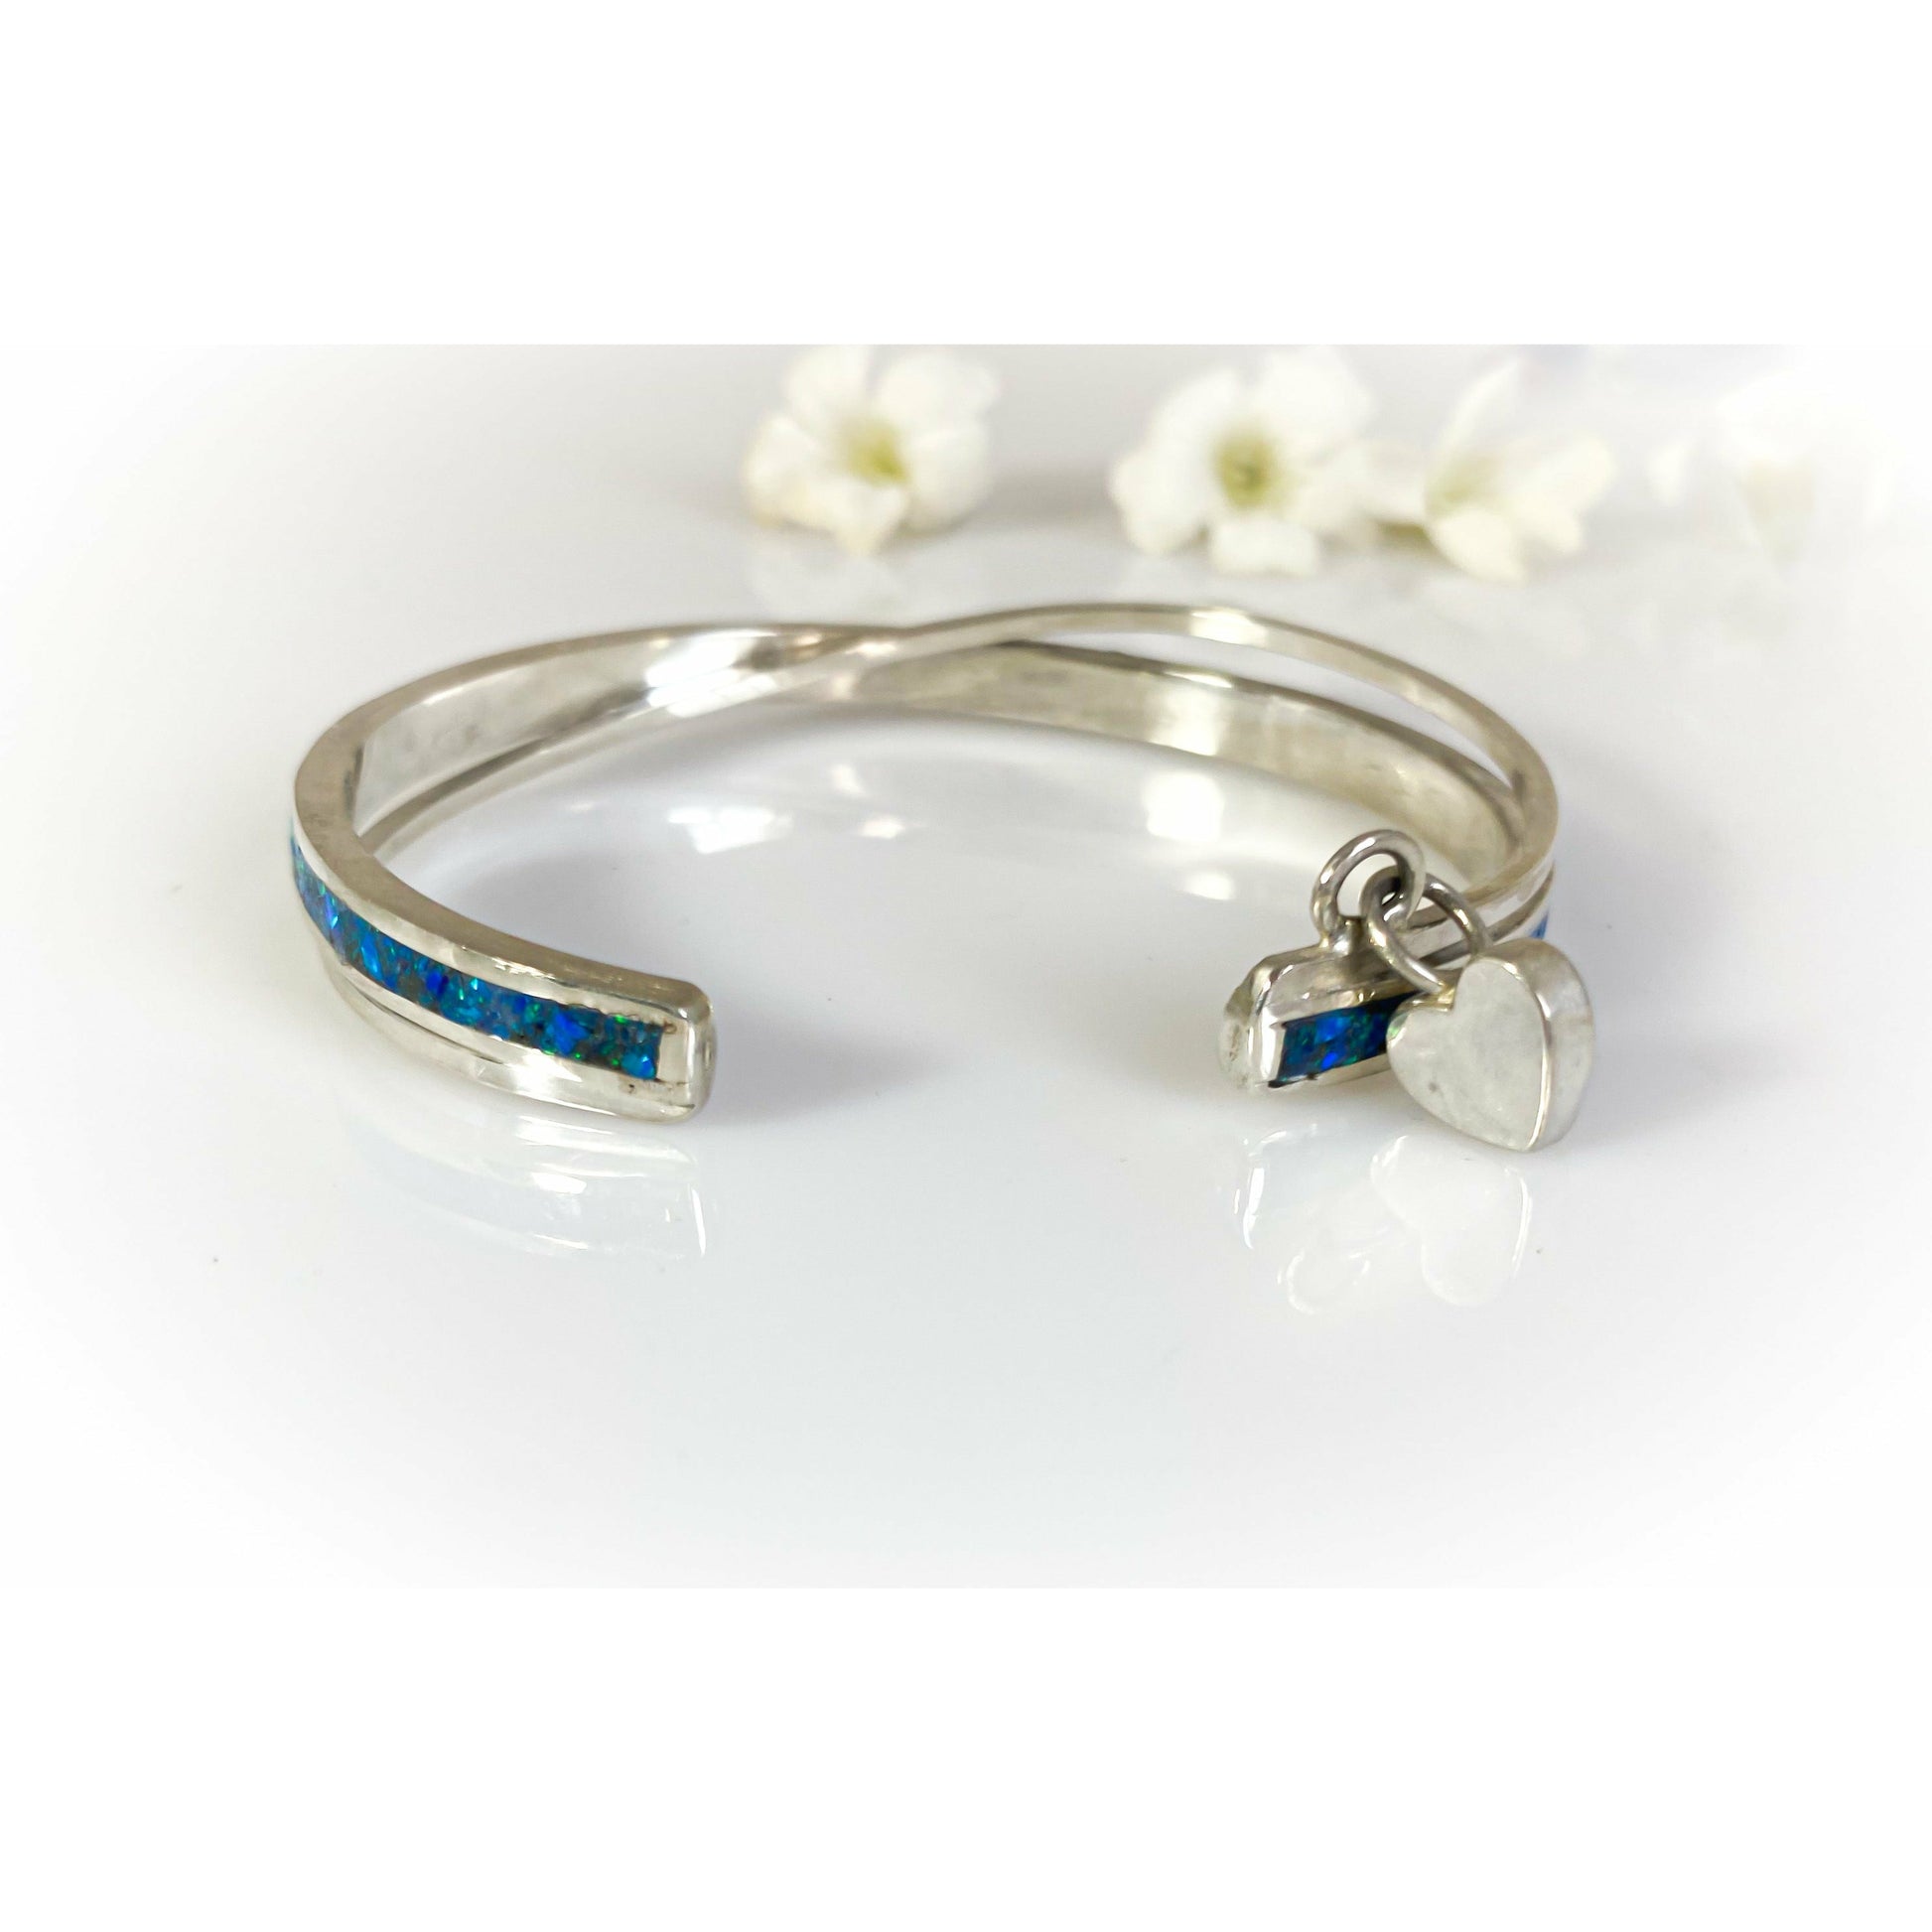 Australian Blue Opal Handcrafted Inlay cuff bracelet with heart charm